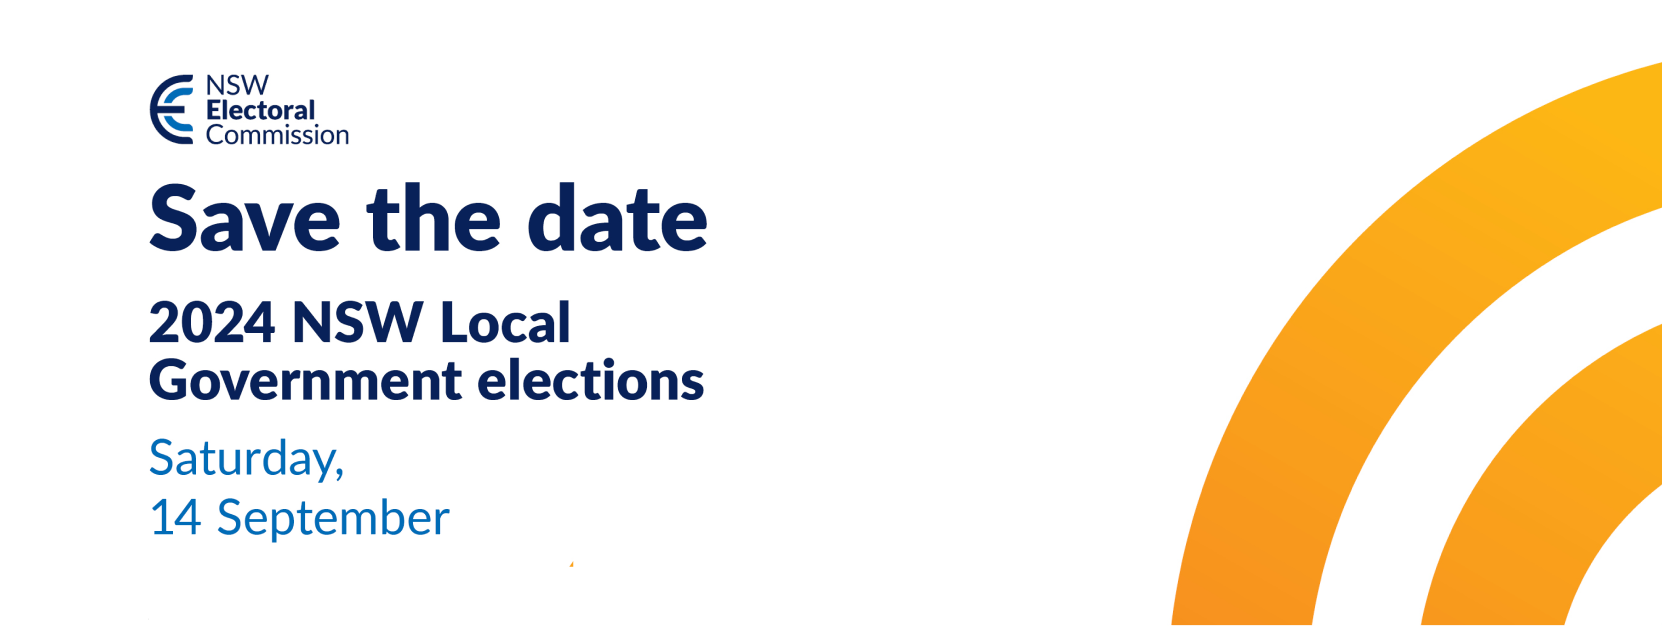 NSW Electoral Commission - save the date banner